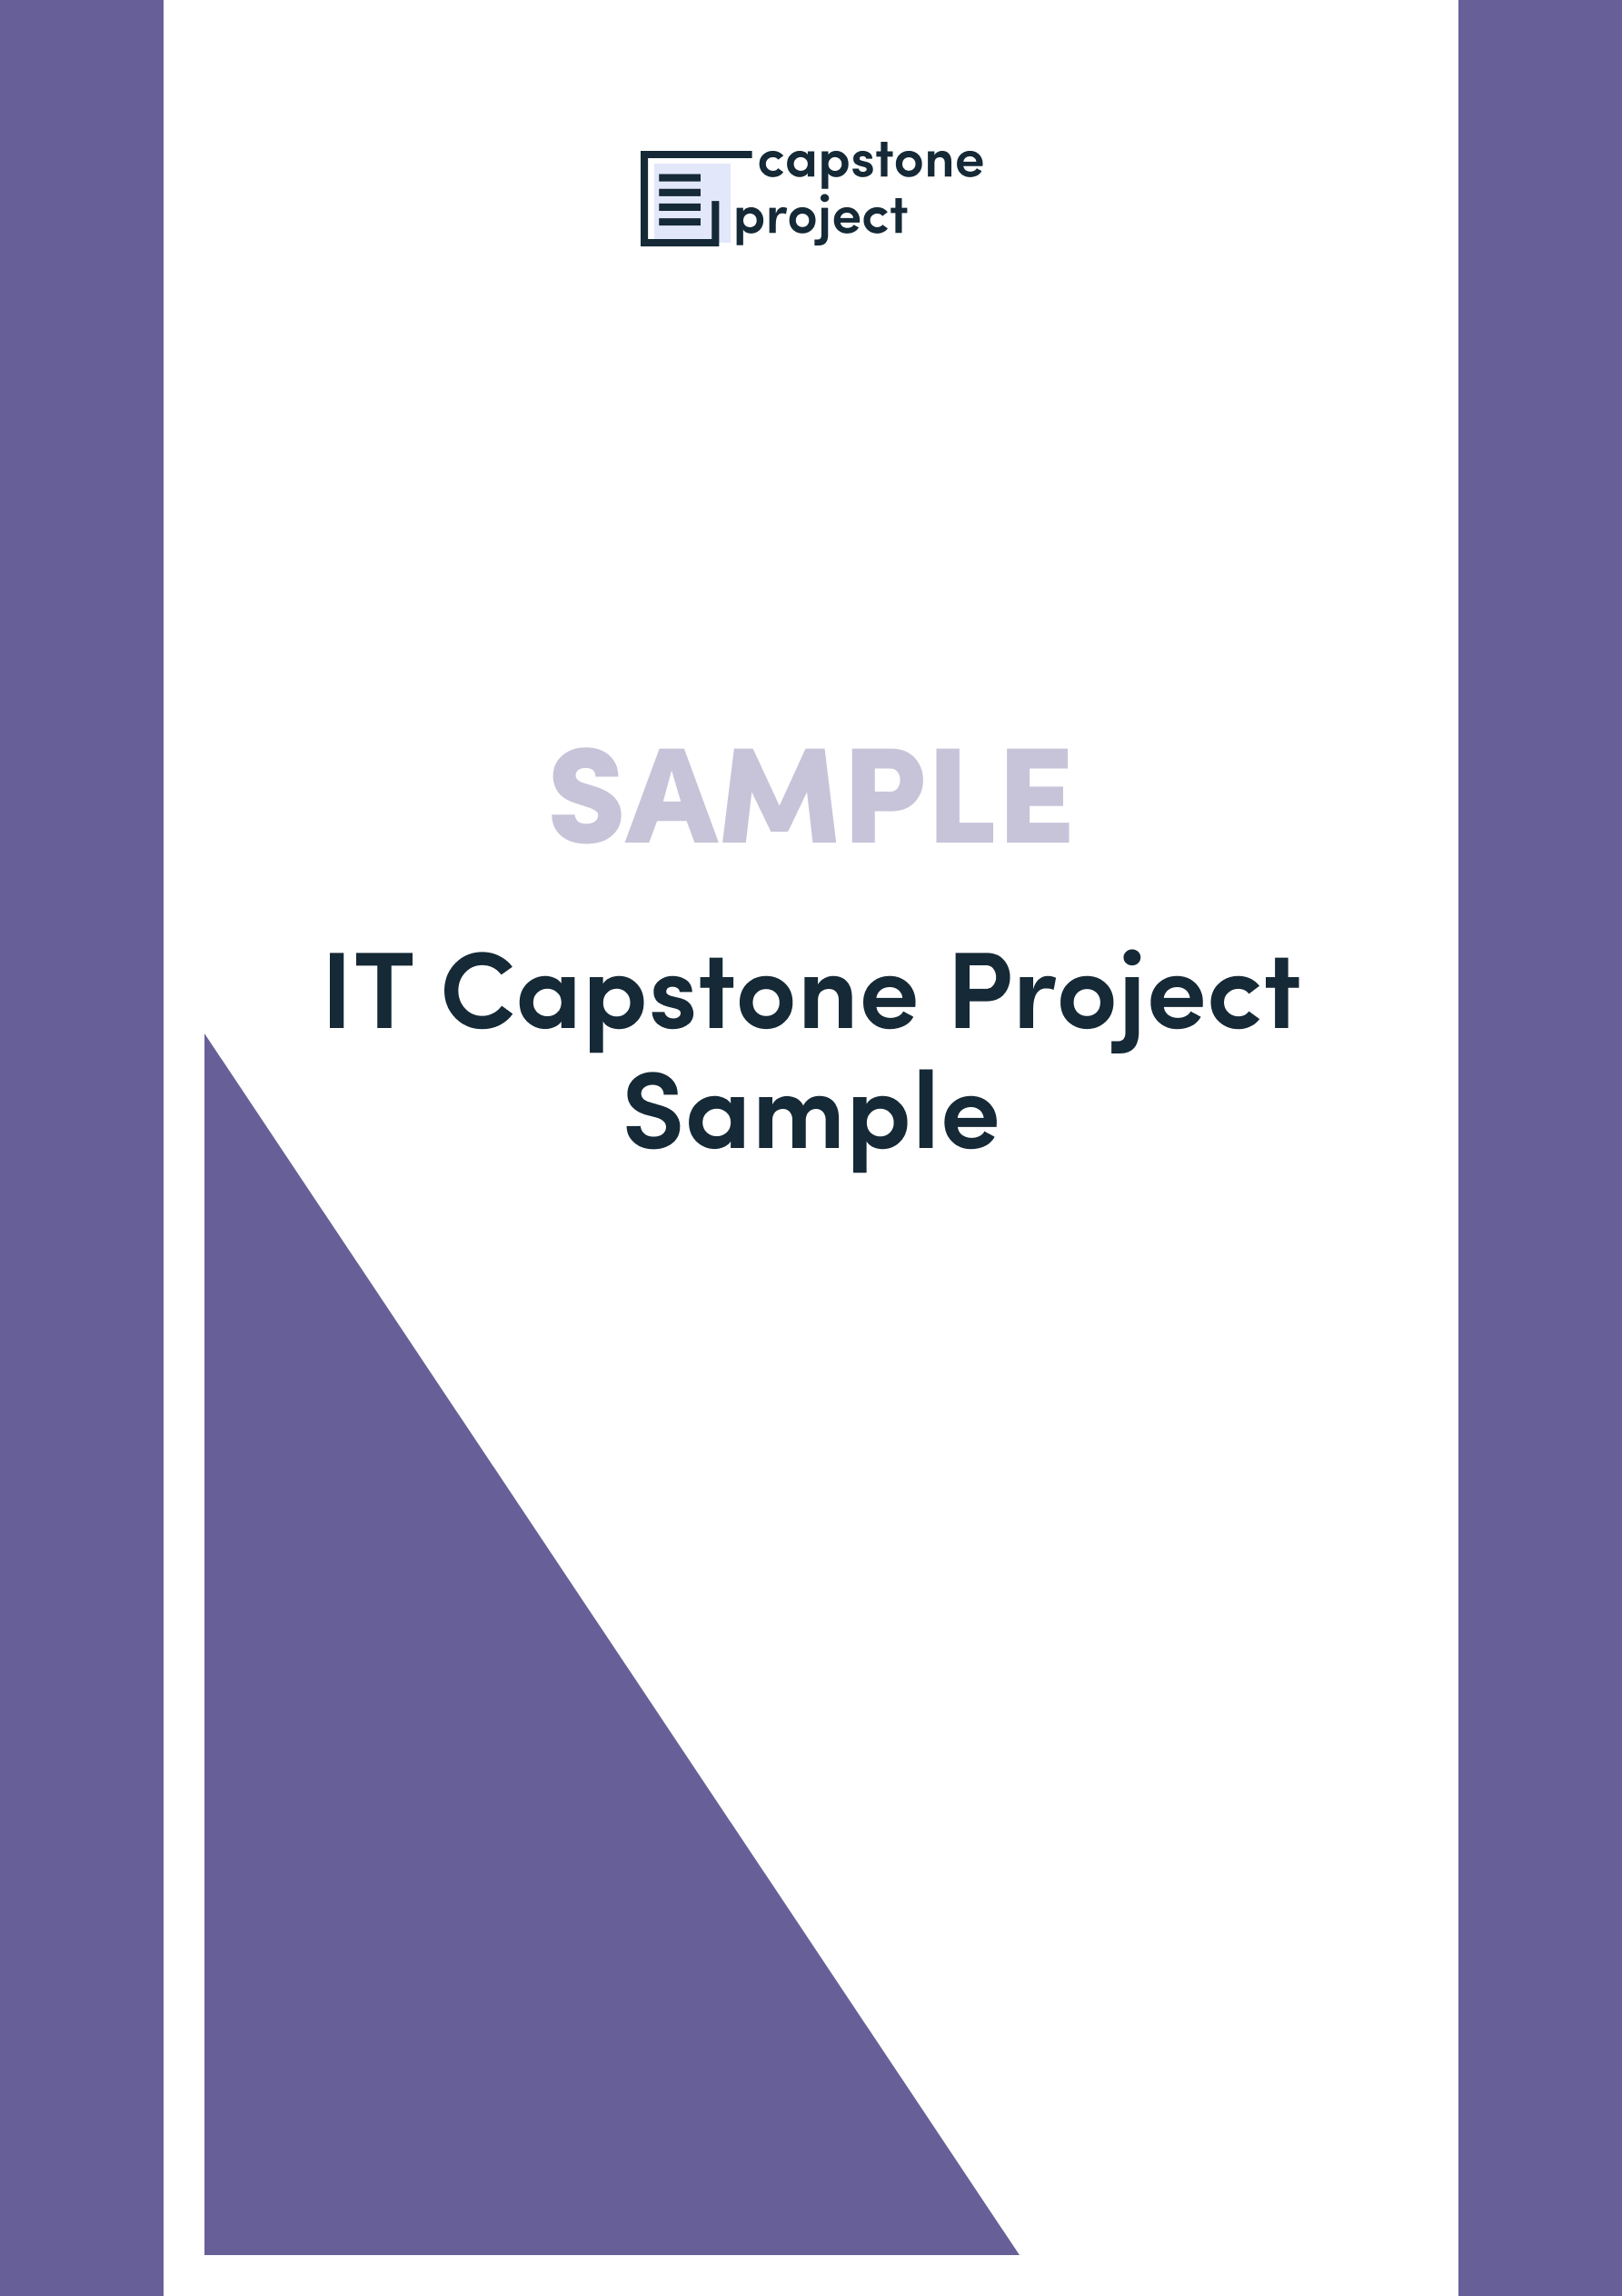 capstone projects in data science